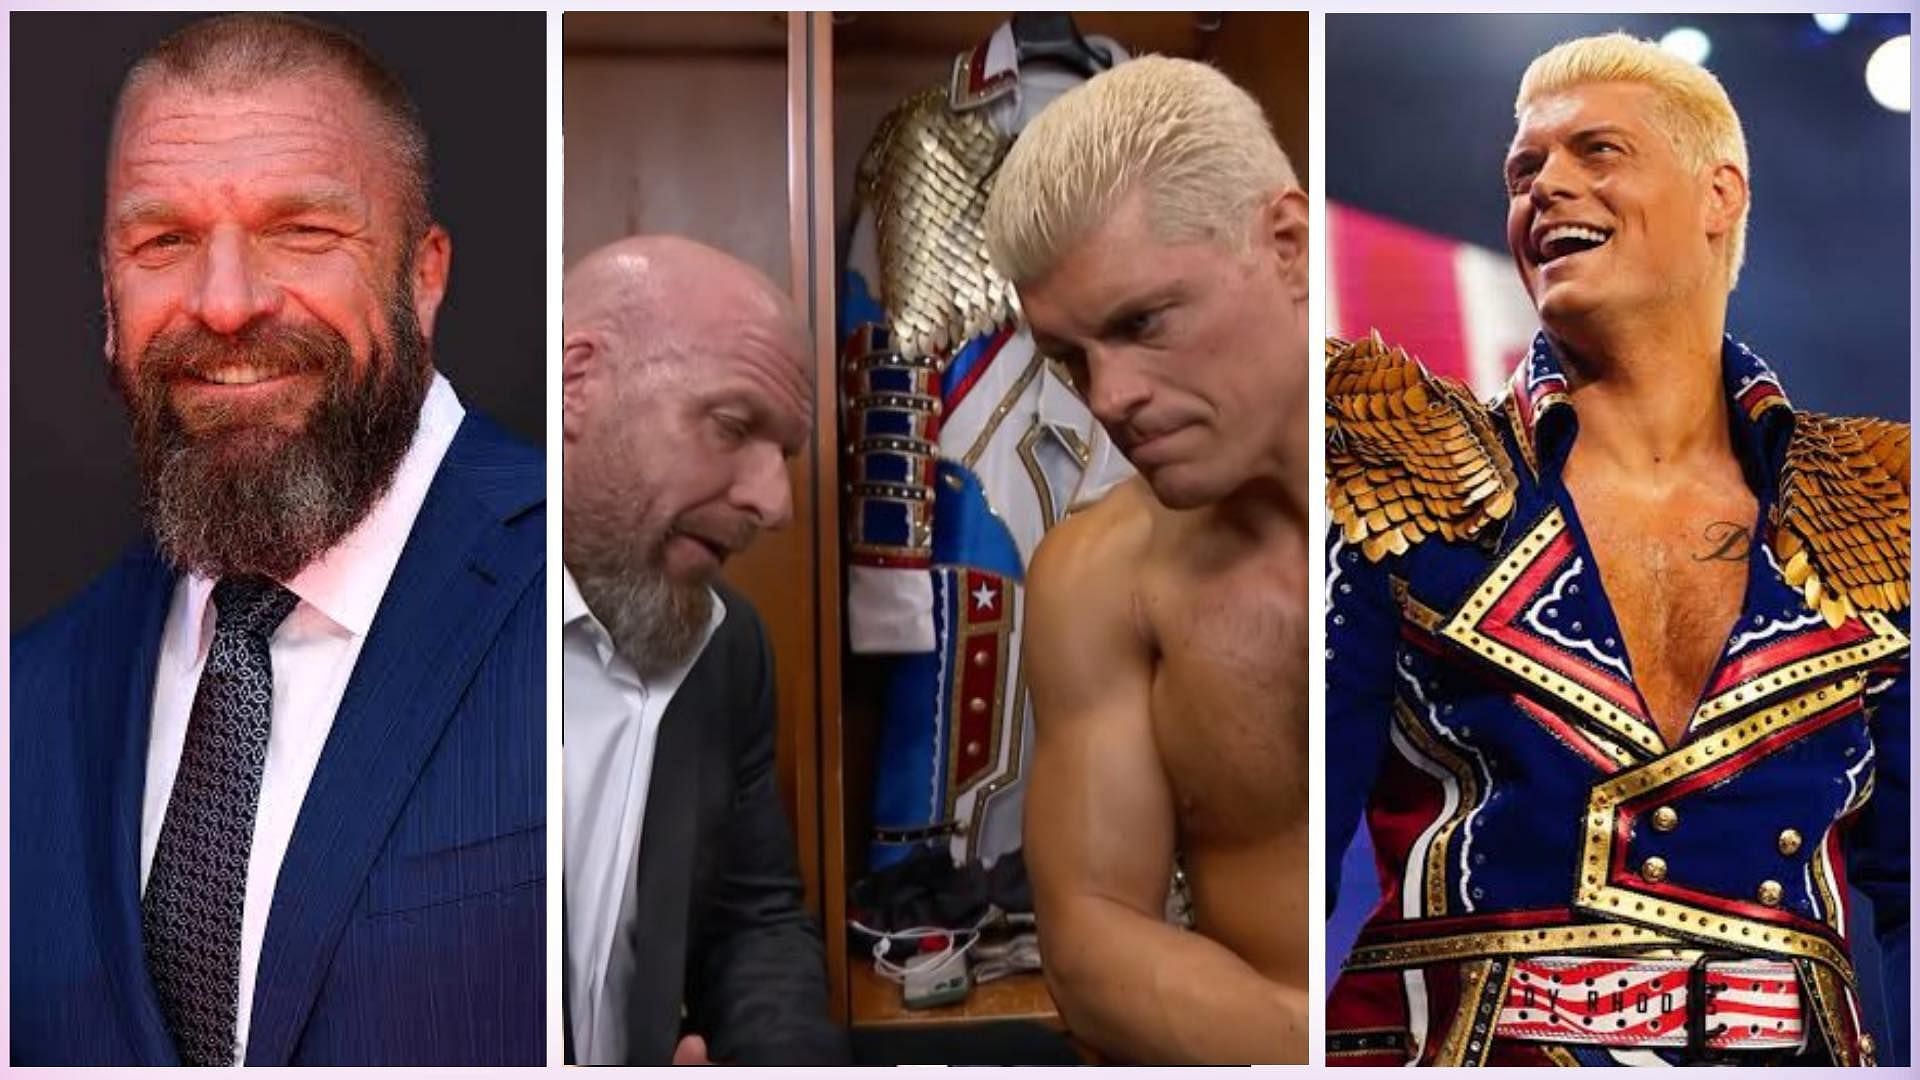 Many WWE fans believe Cody Rhodes is being groomed as the next Triple H